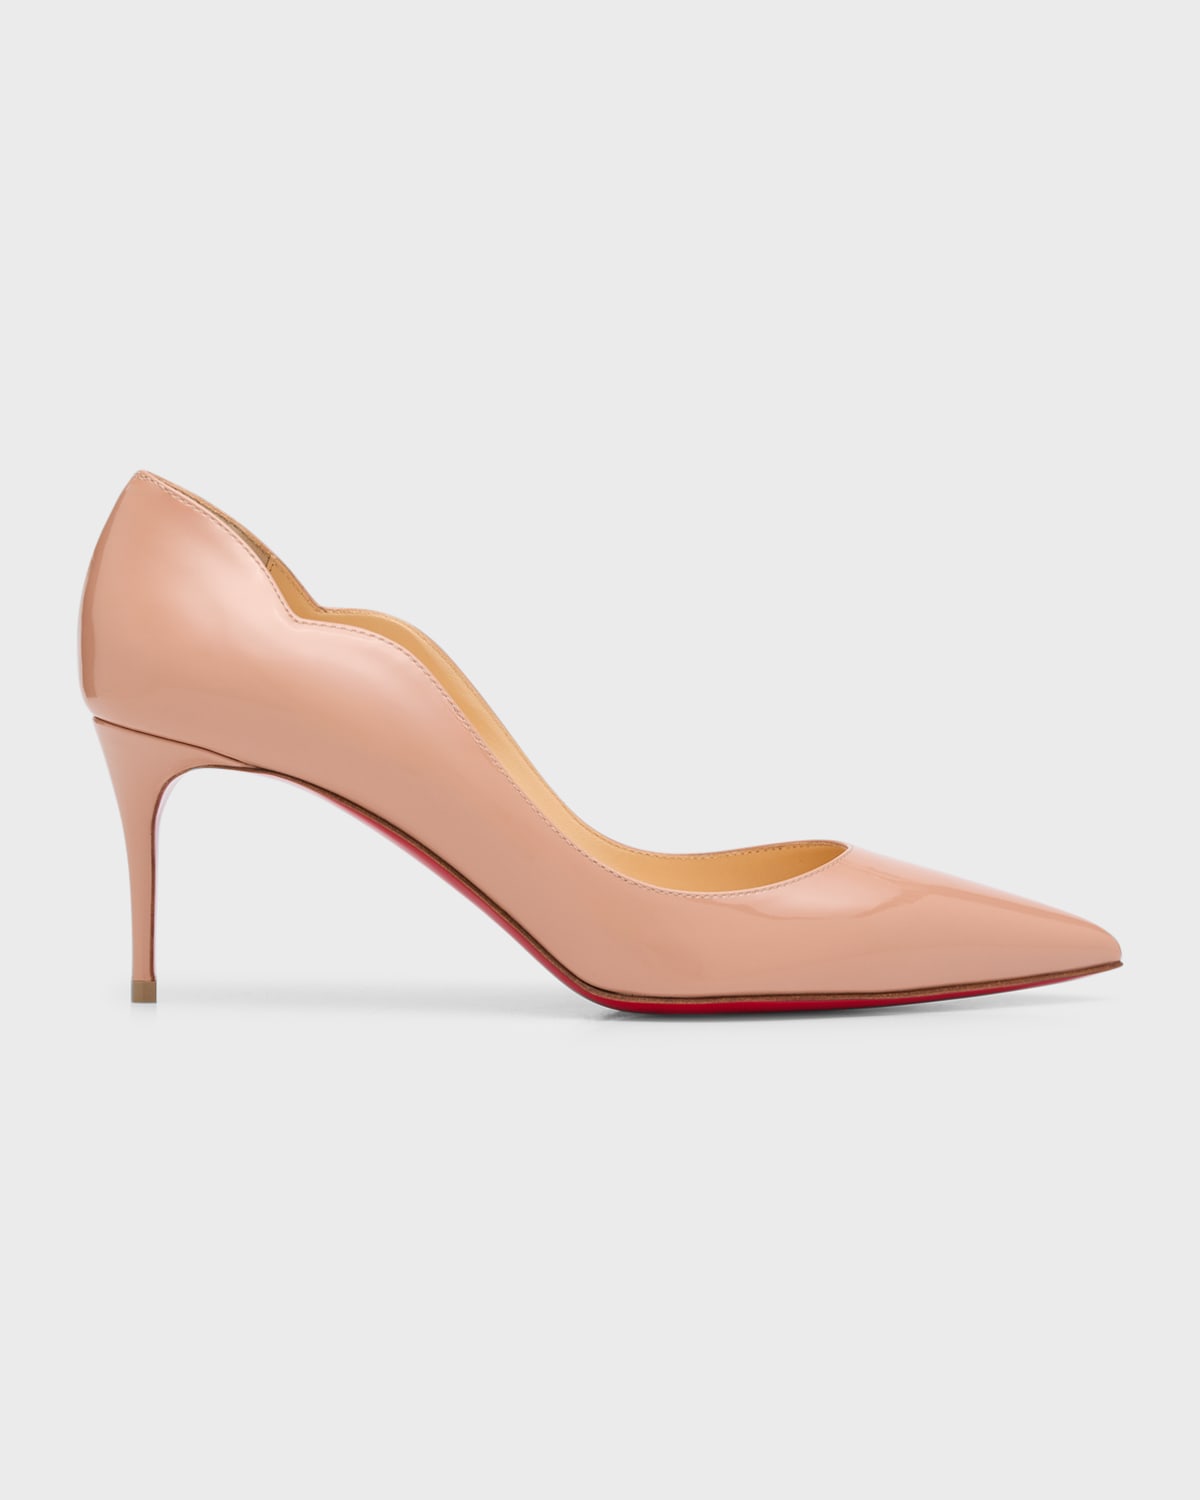 CHRISTIAN LOUBOUTIN HOT CHICK PATENT RED SOLE PUMPS